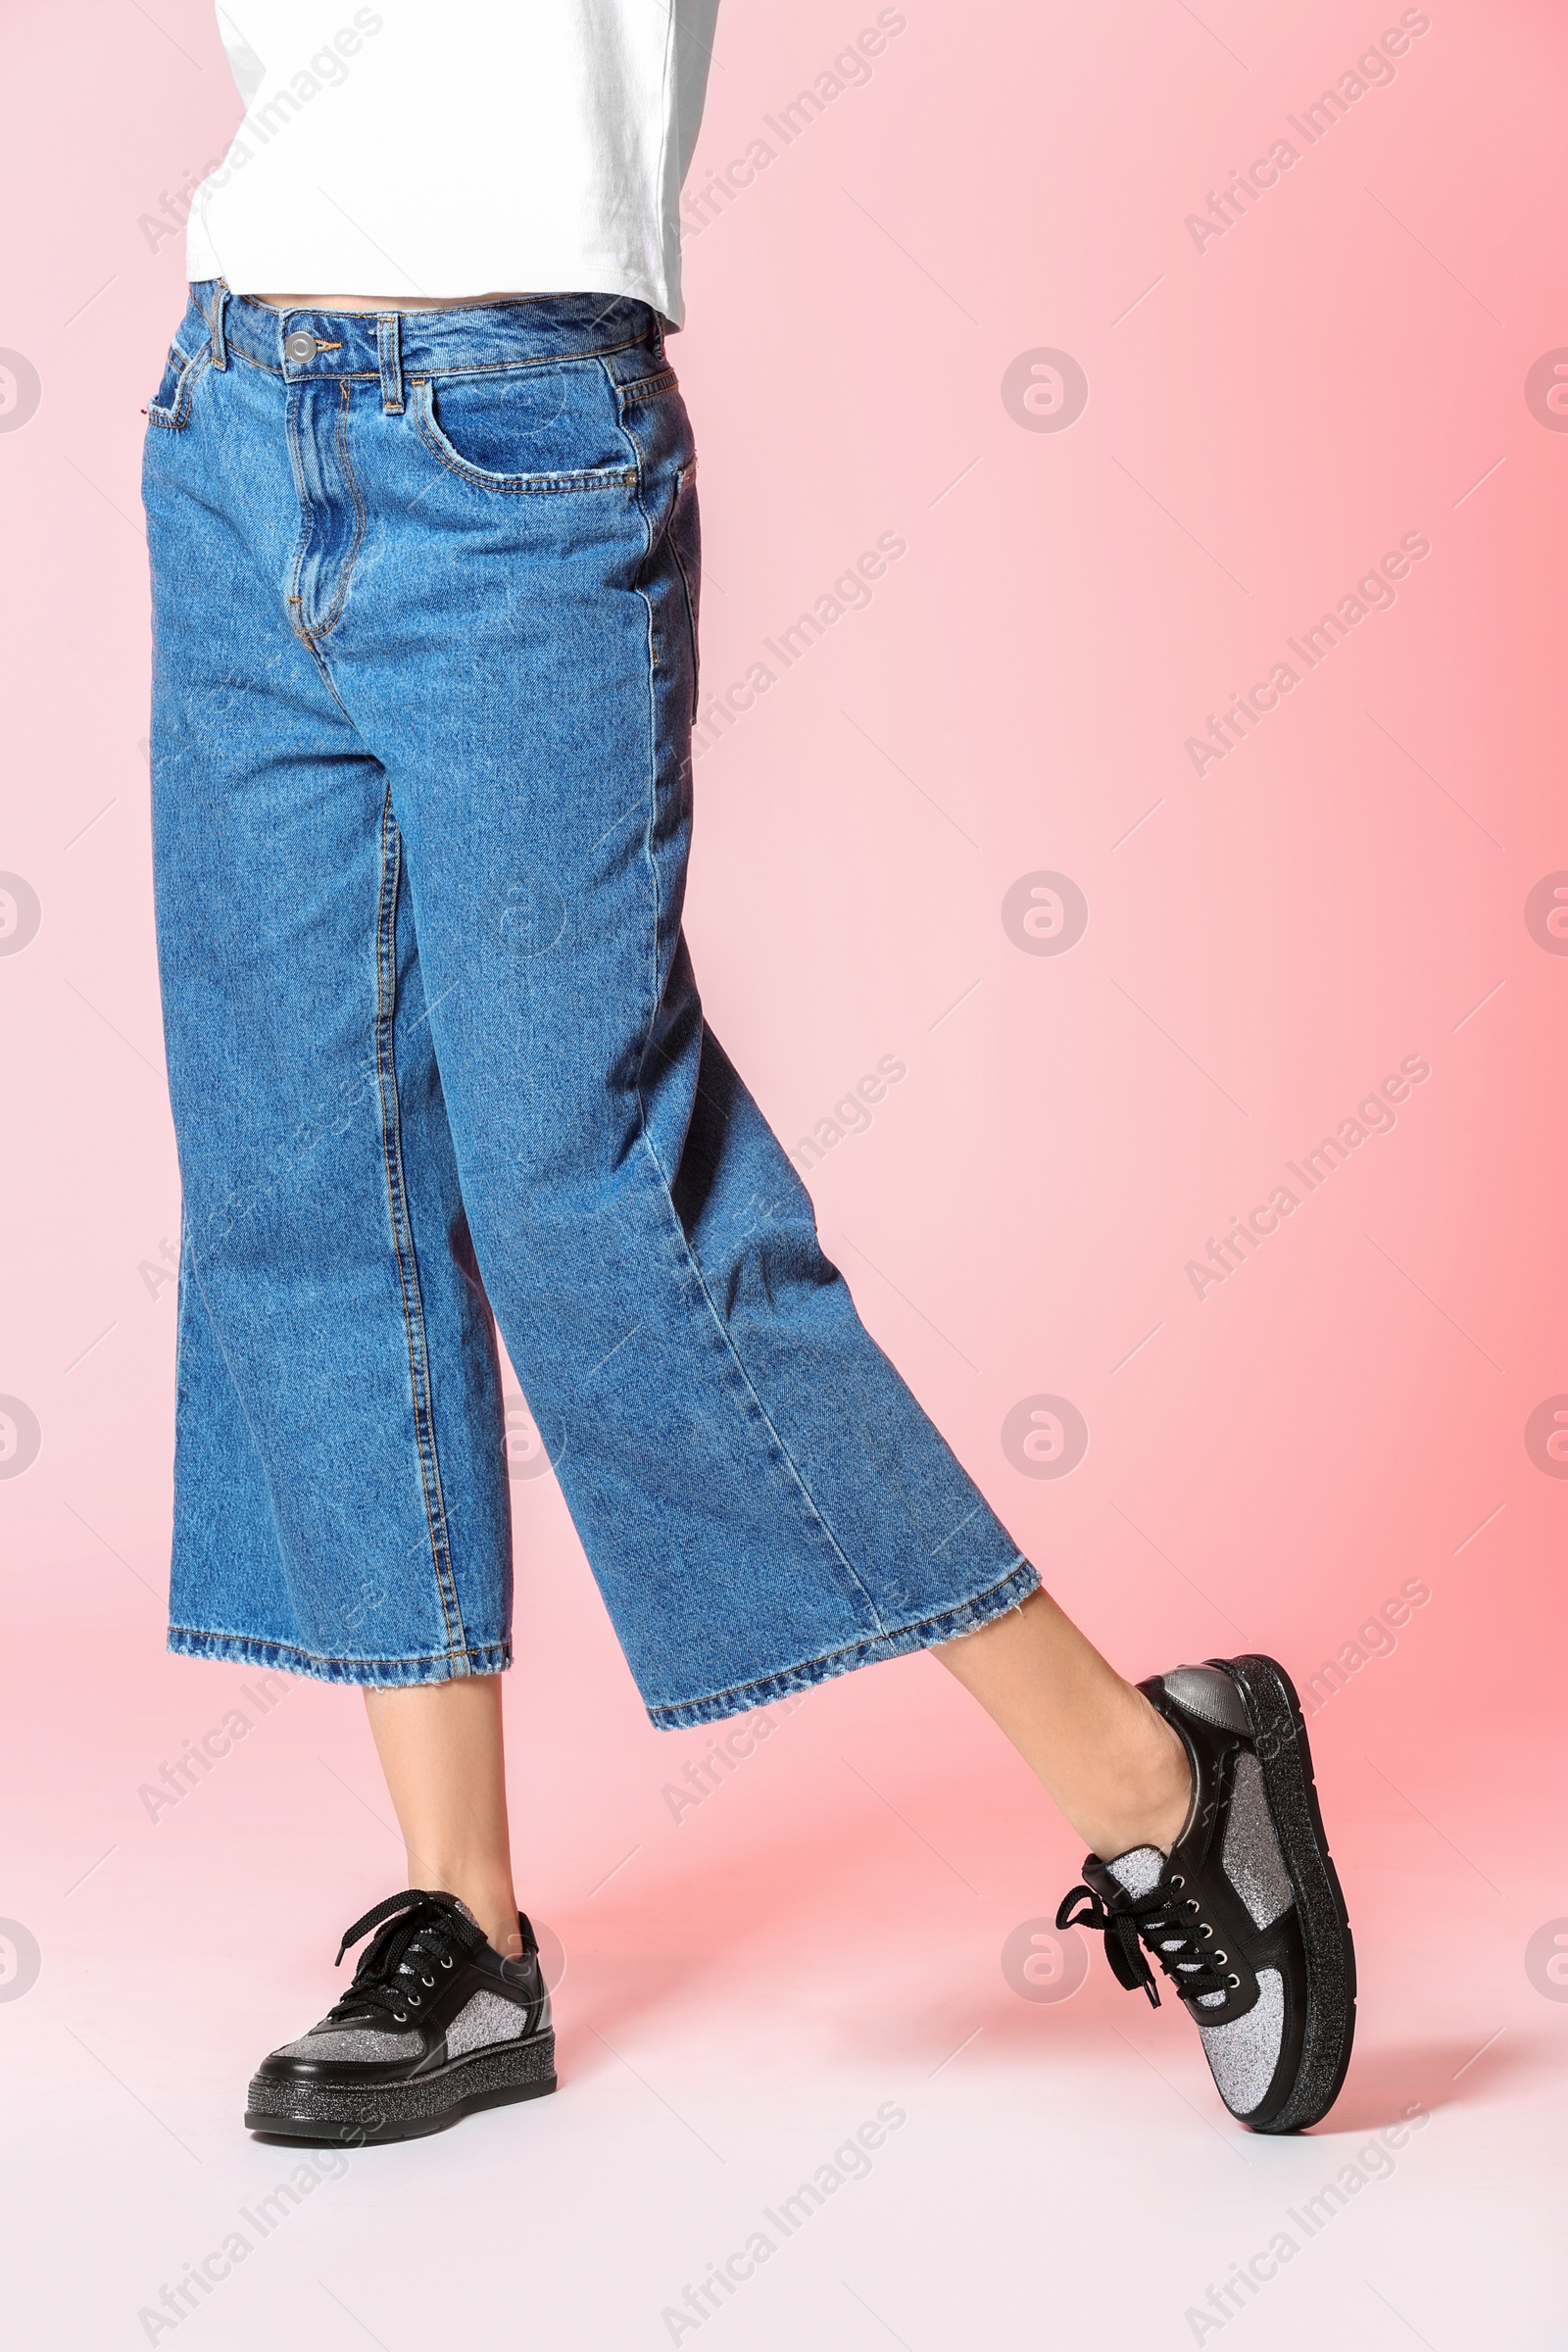 Photo of Fashionable woman in stylish shoes on color background